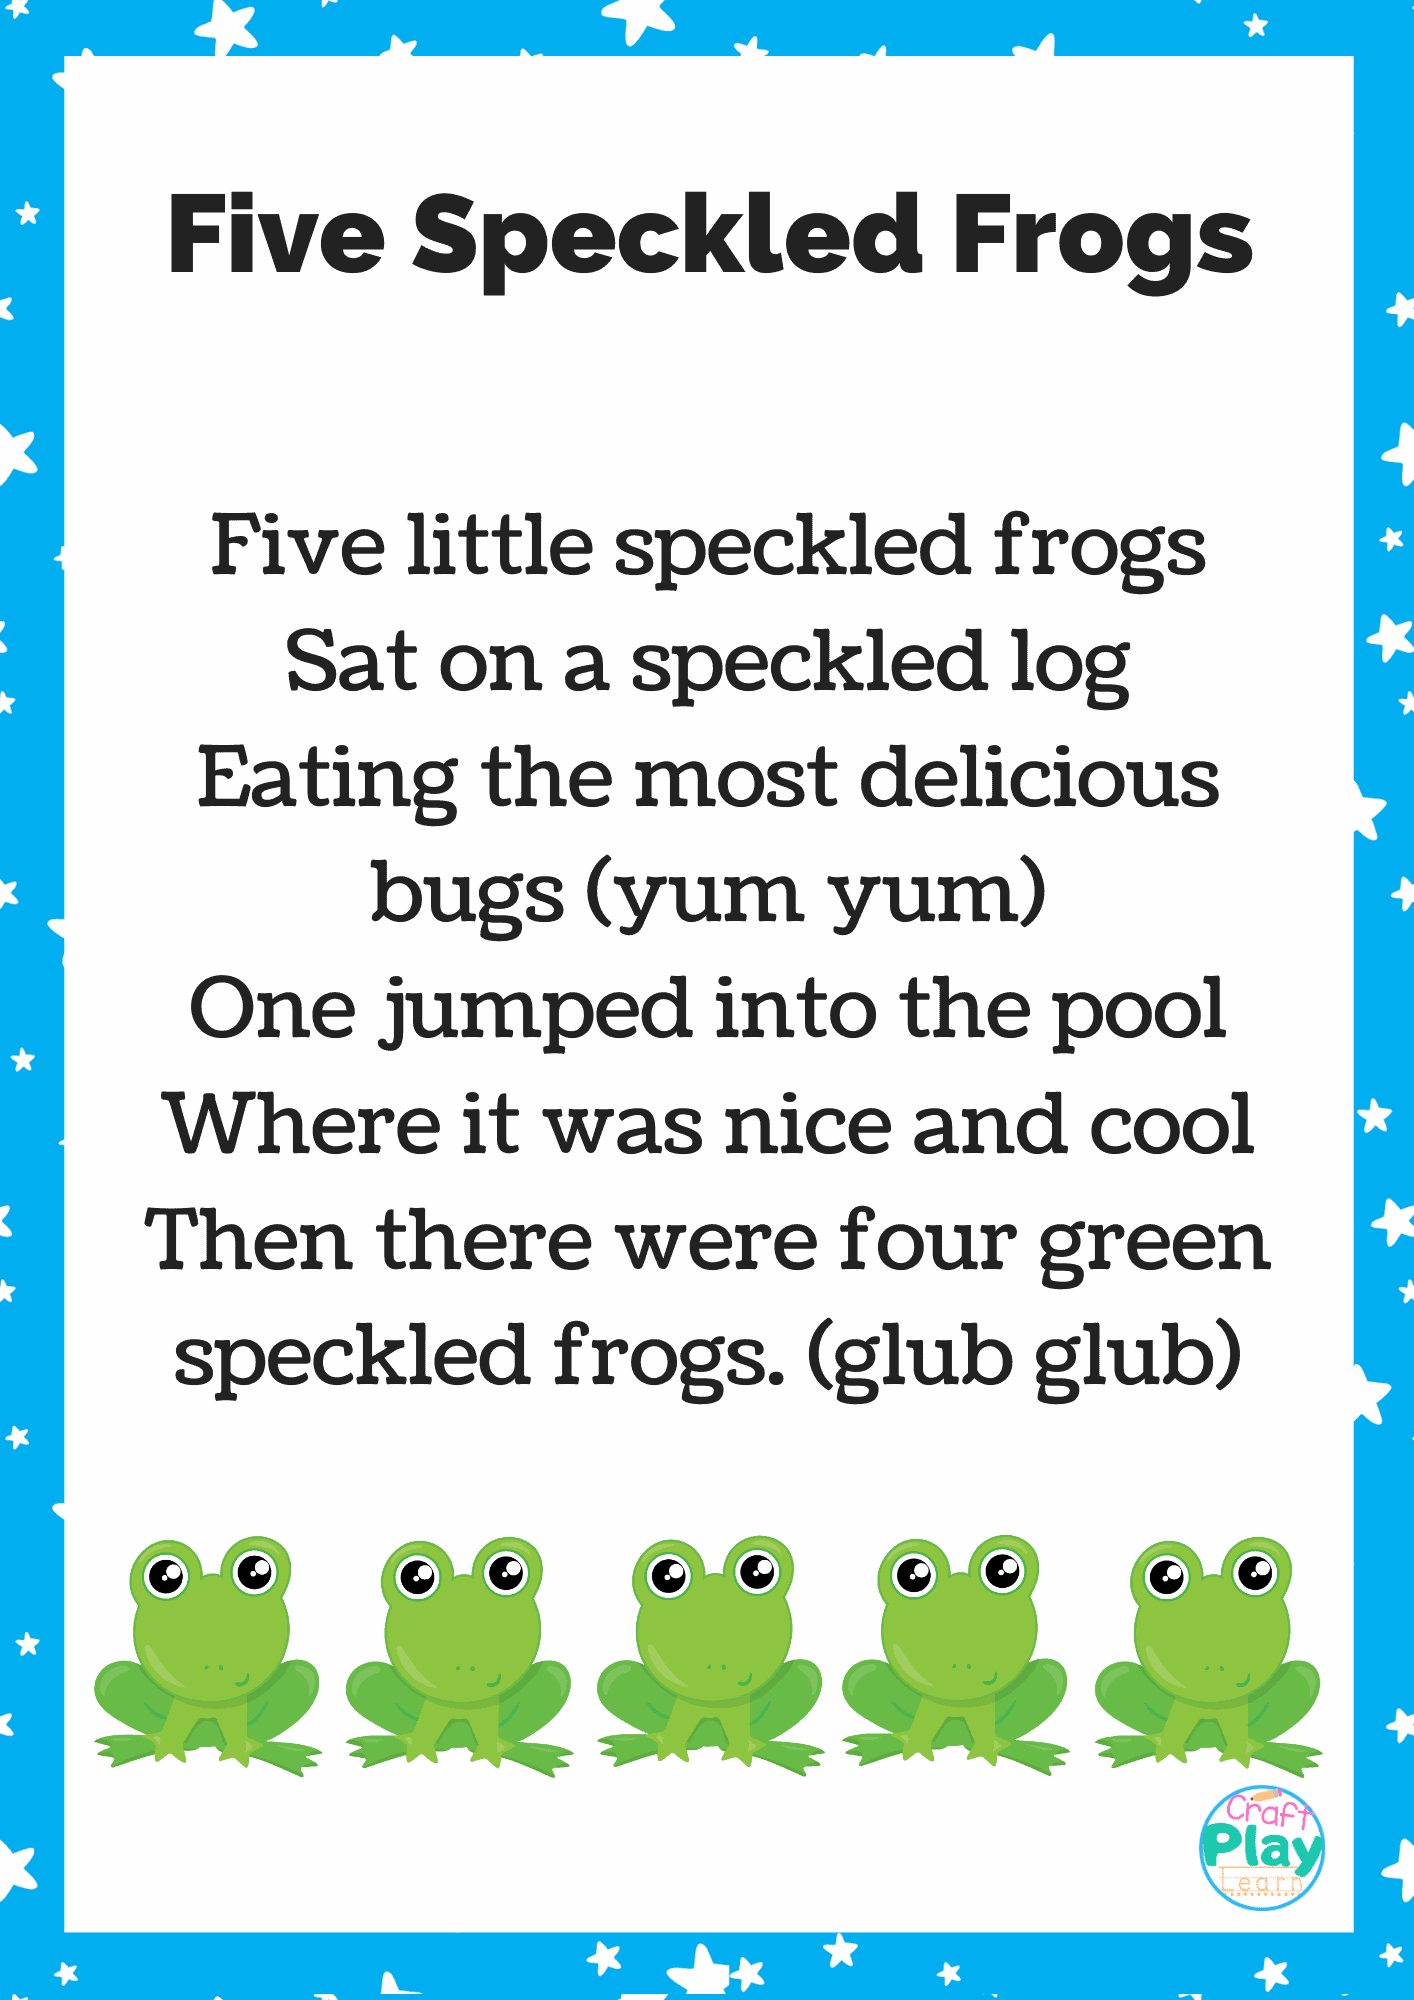 Five Speckled Frogs Activities and Printable Lyrics · The Inspiration Edit